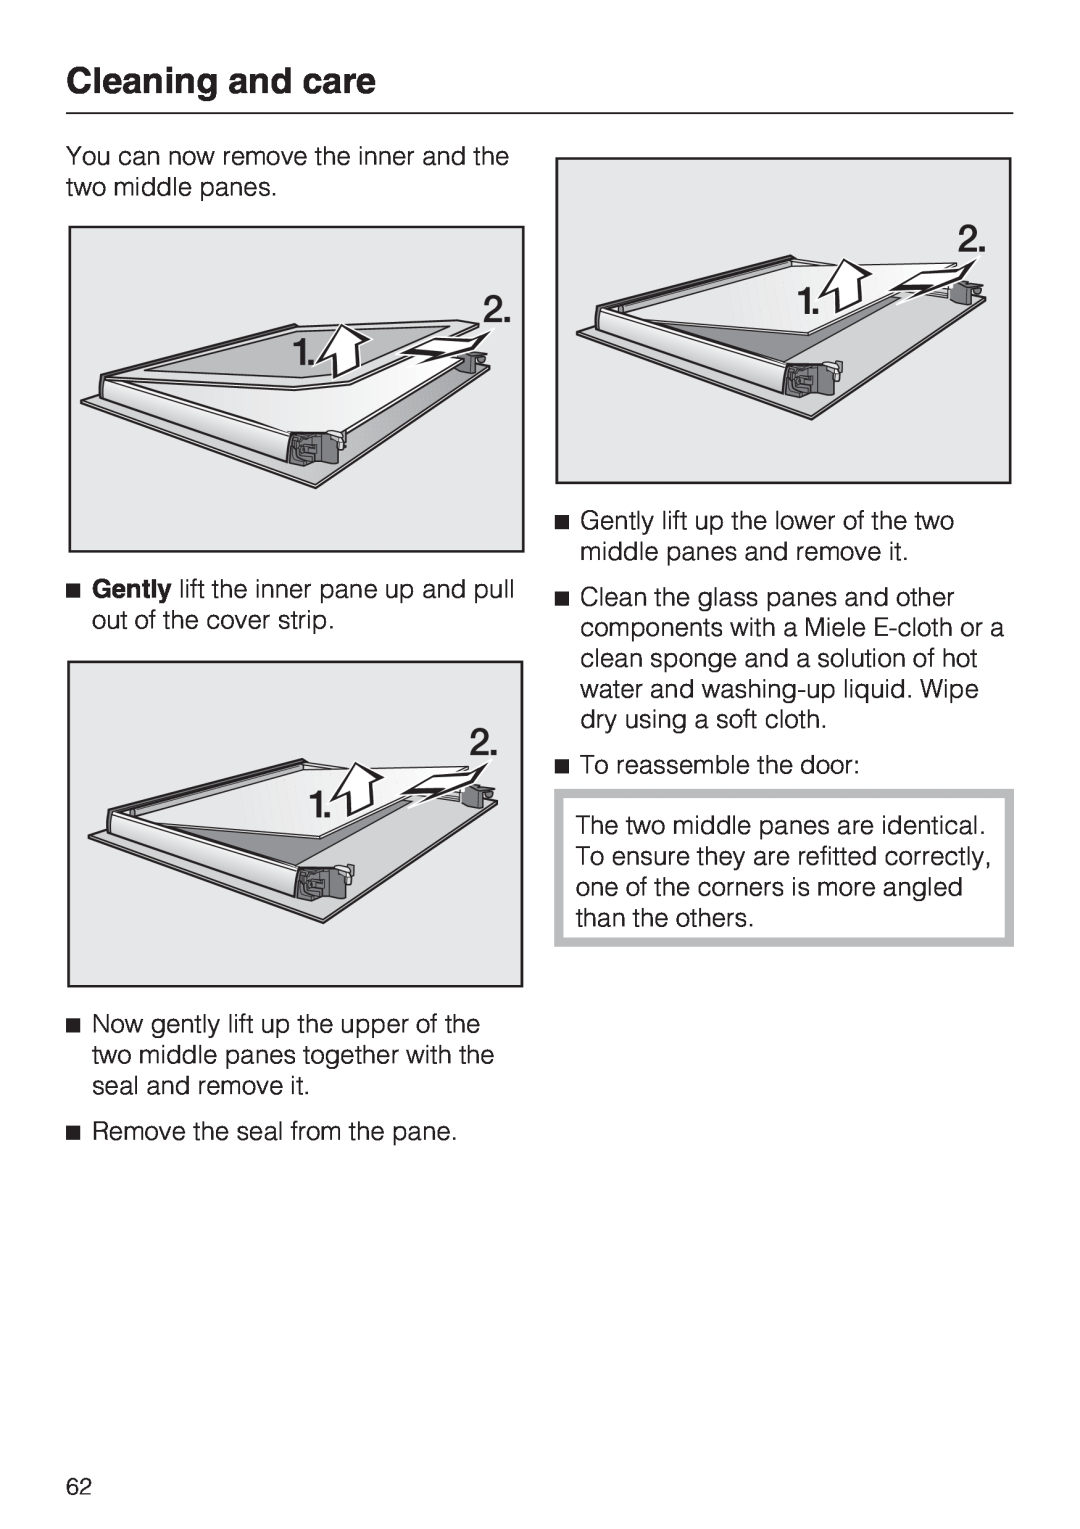 Miele H 5961 B installation instructions Cleaning and care, Remove the seal from the pane 